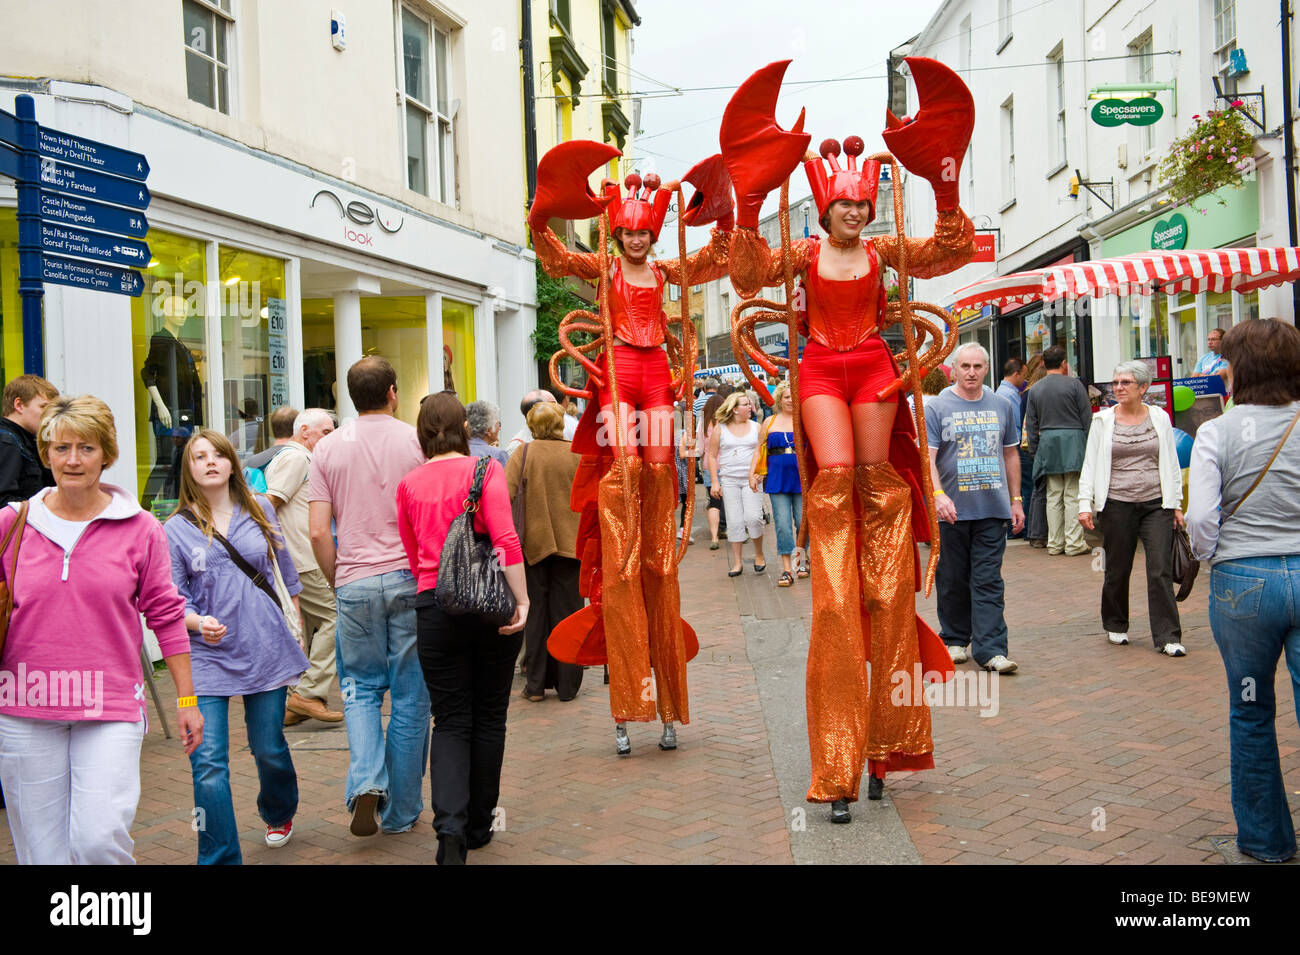 Stilt walking street performance artists dressed as lobsters at Abergavenny Food Festival Monmouthshire South Wales UK Stock Photo